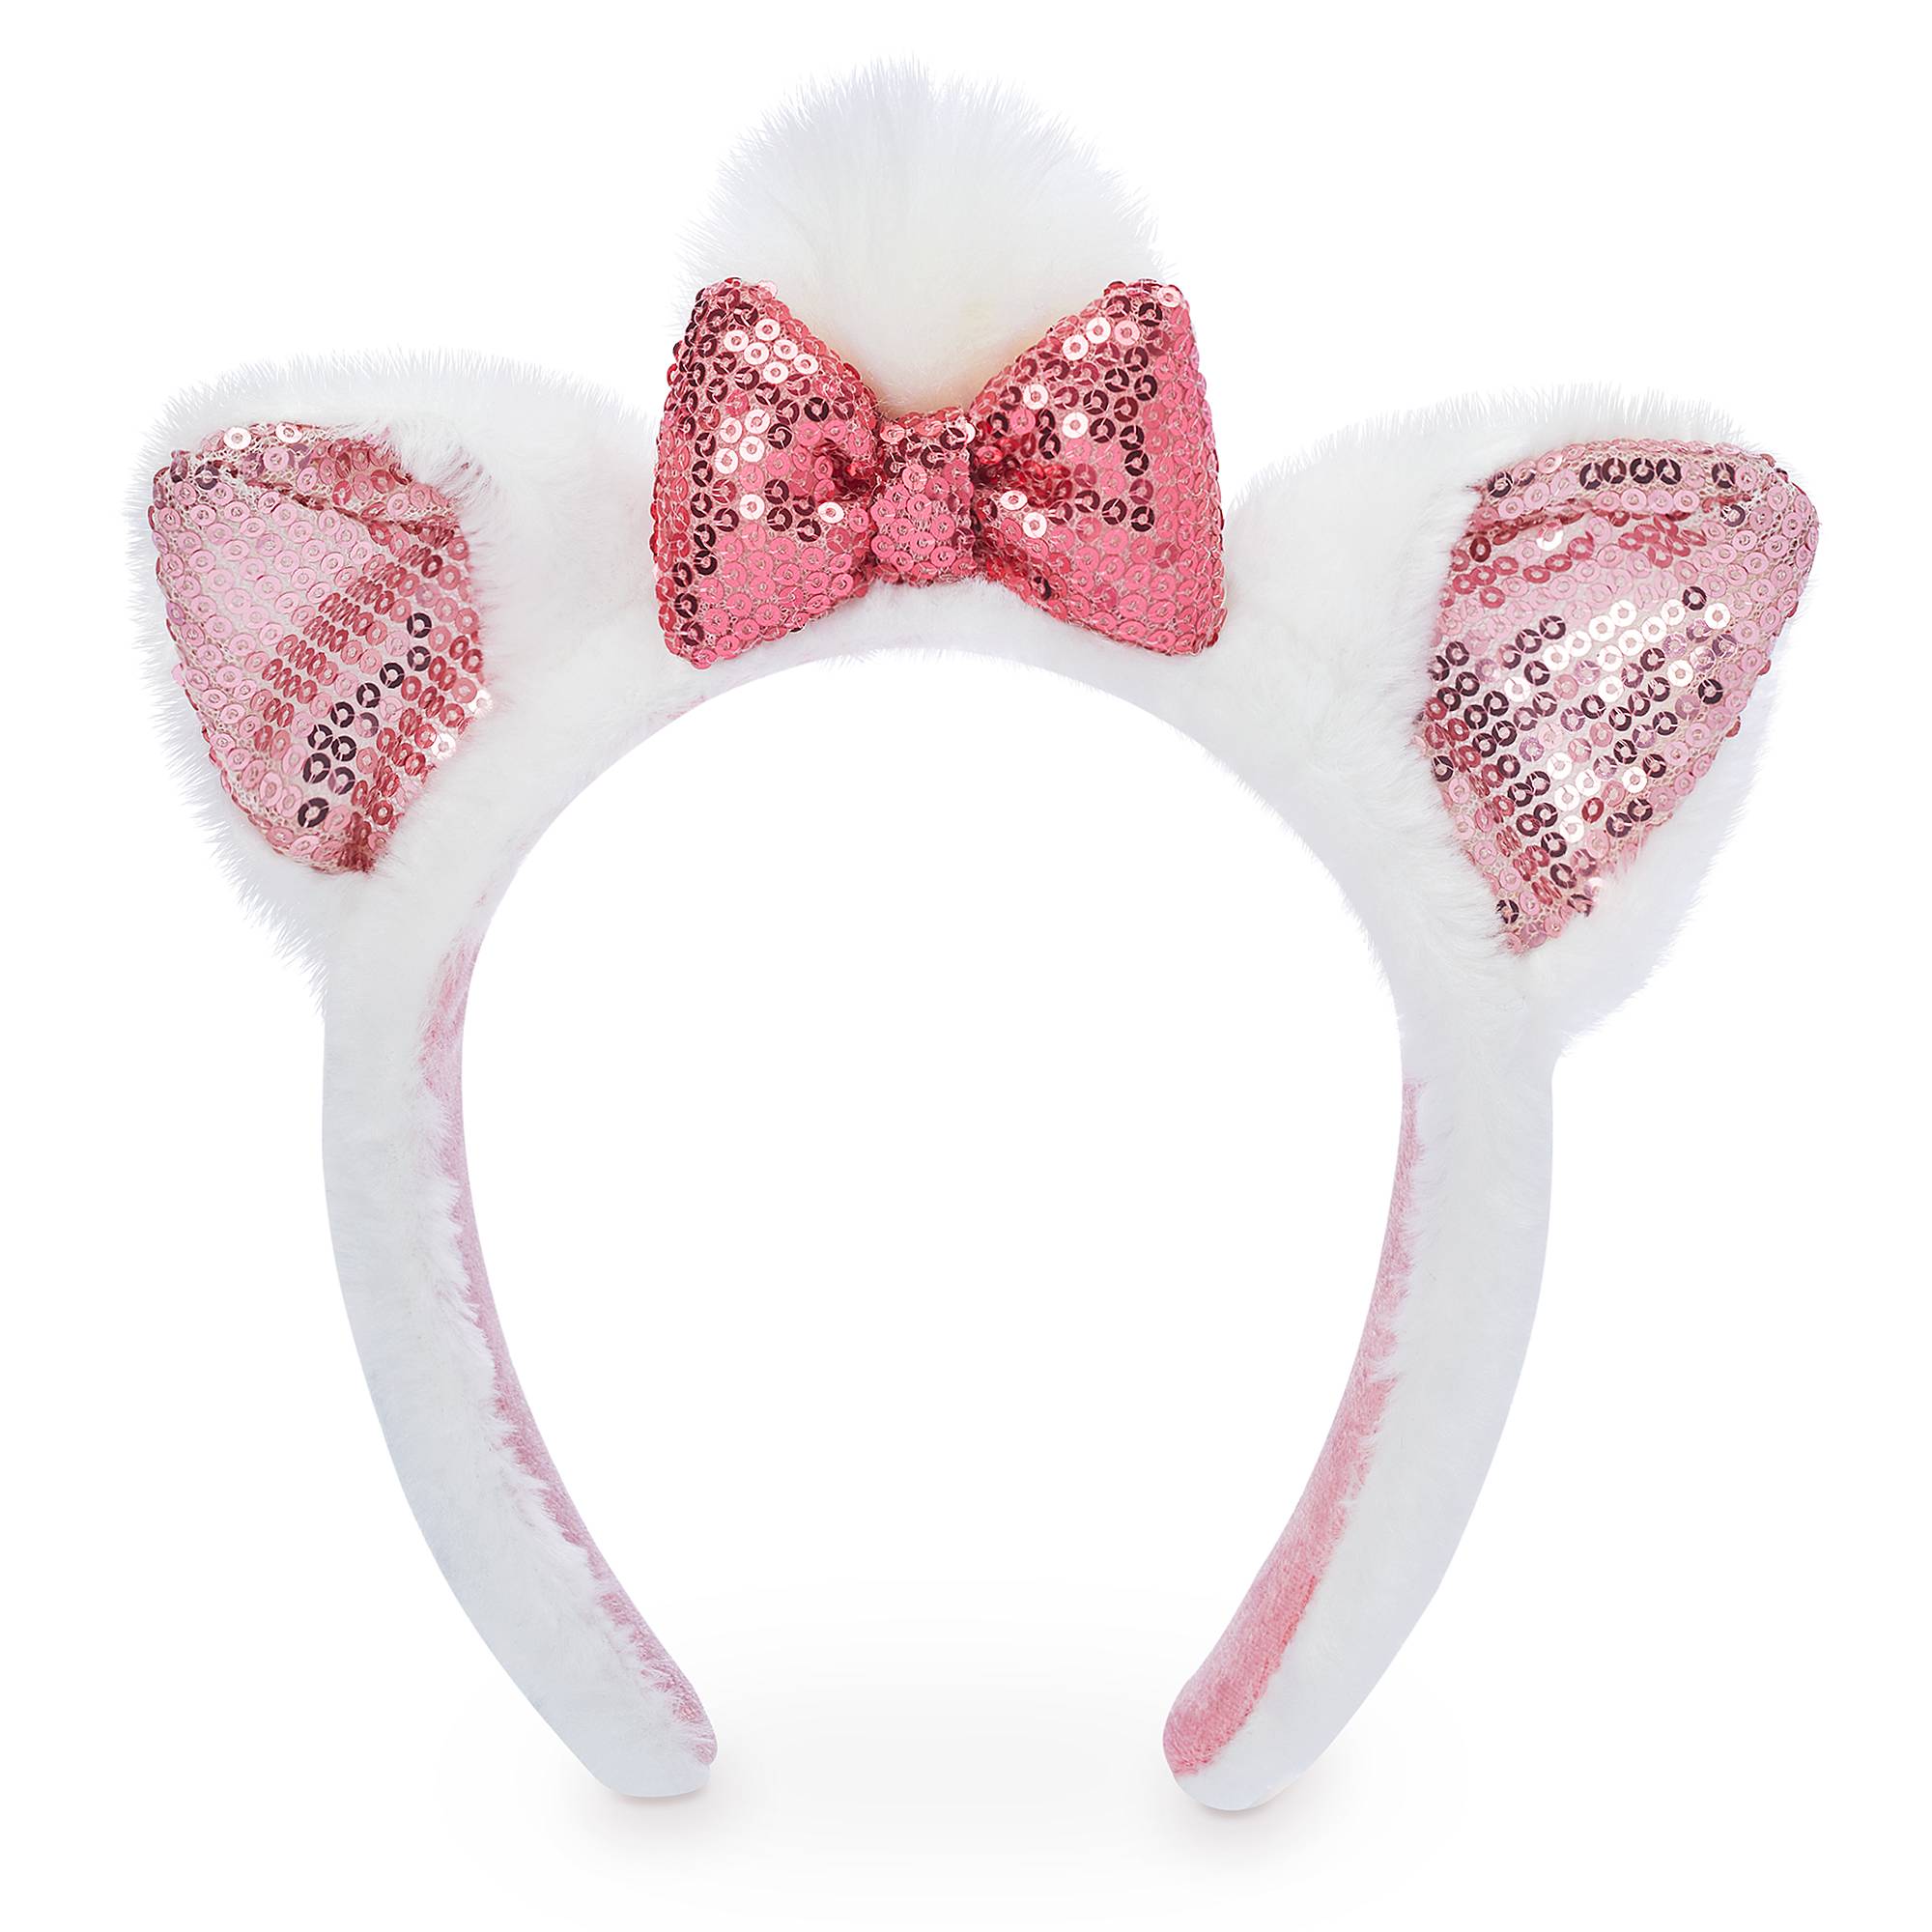 Marie Plush Headband for Adults – The Aristocats image